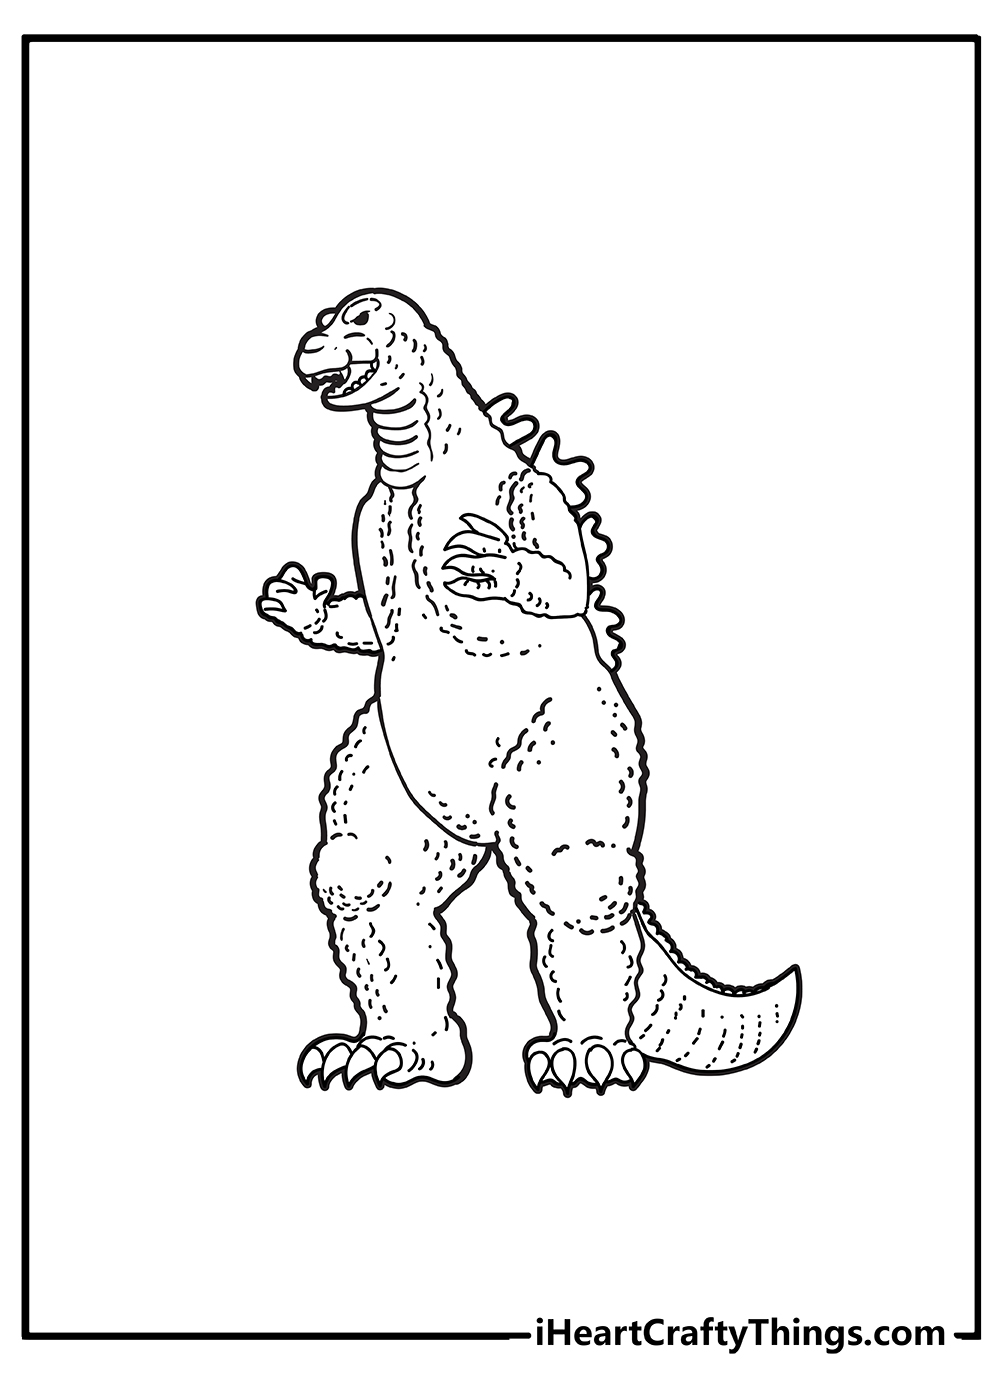 Godzilla Coloring Pages free pdf download